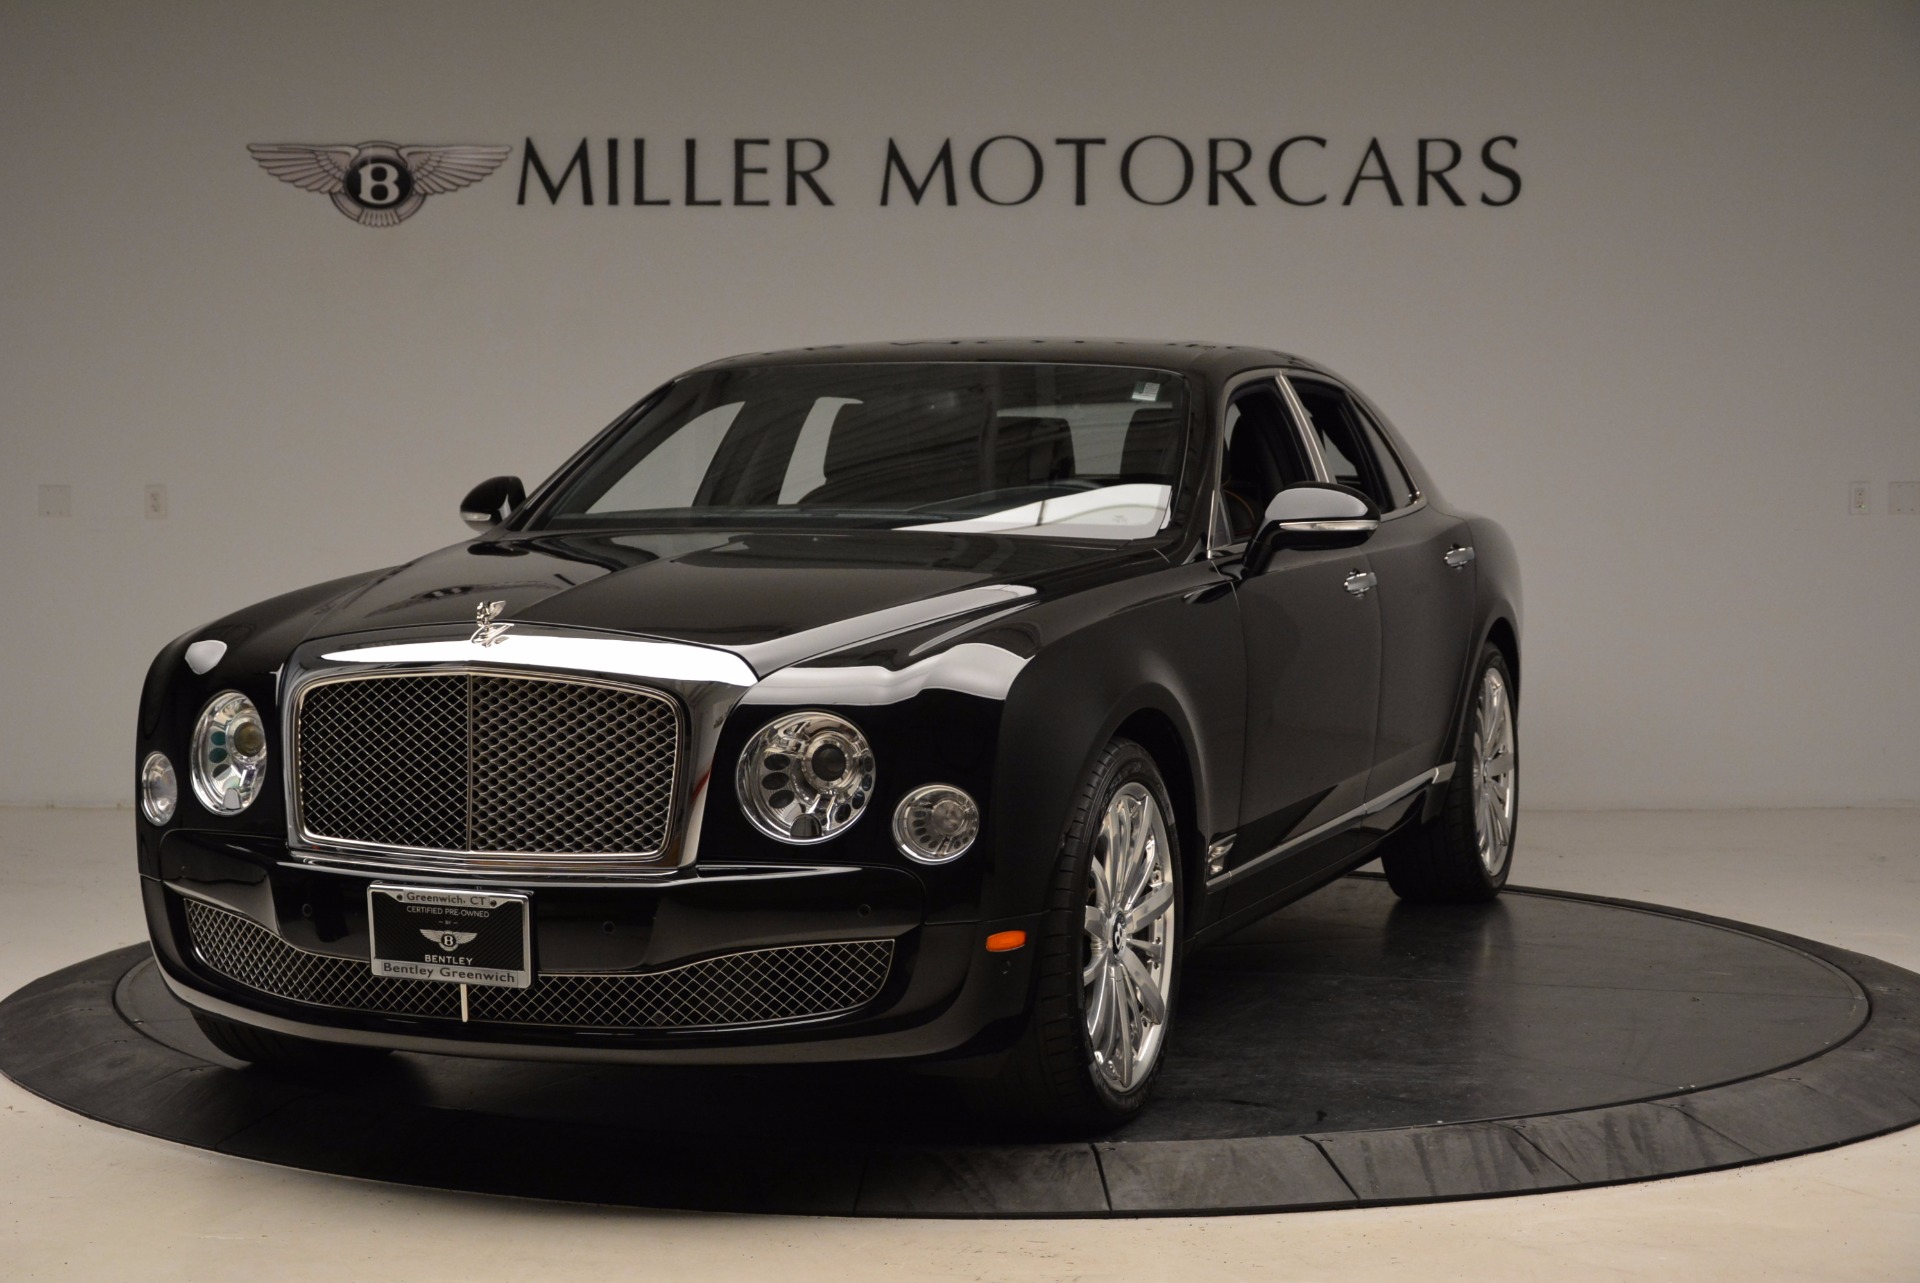 Used 2016 Bentley Mulsanne for sale Sold at Pagani of Greenwich in Greenwich CT 06830 1